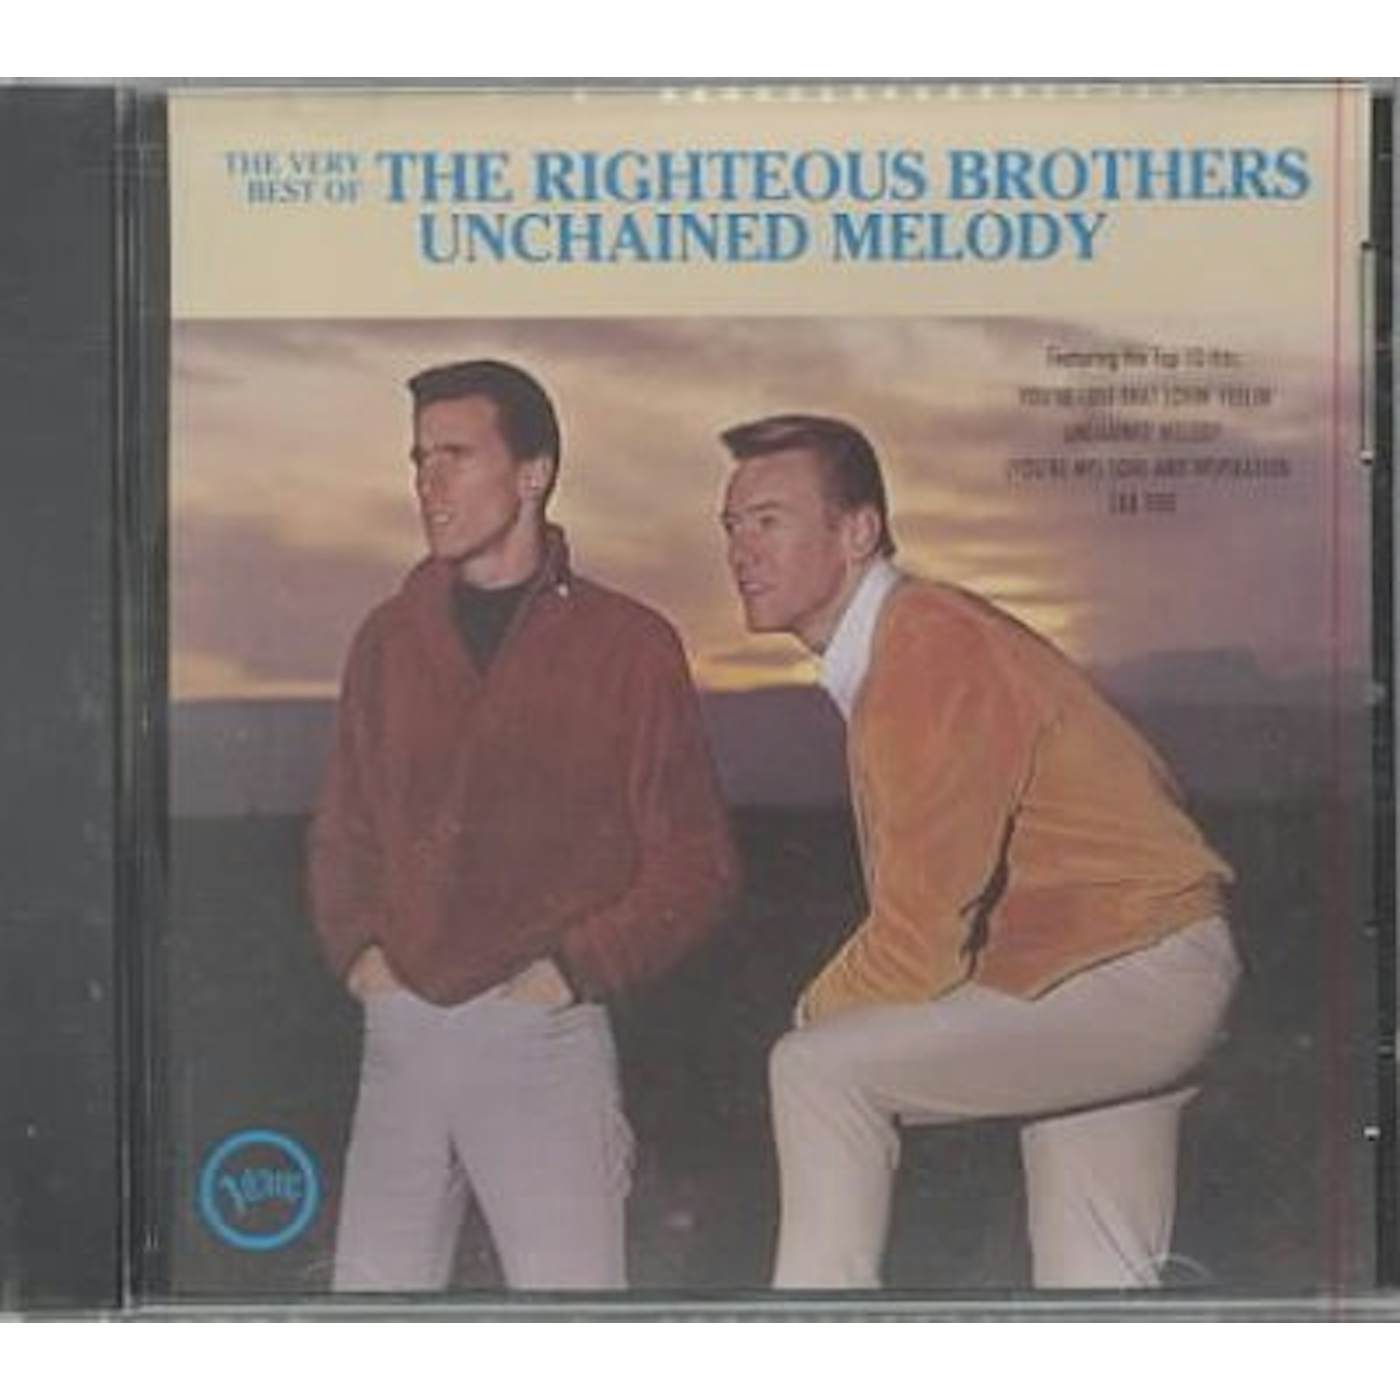 The Righteous Brothers Very Best Of: Unchained Melody CD